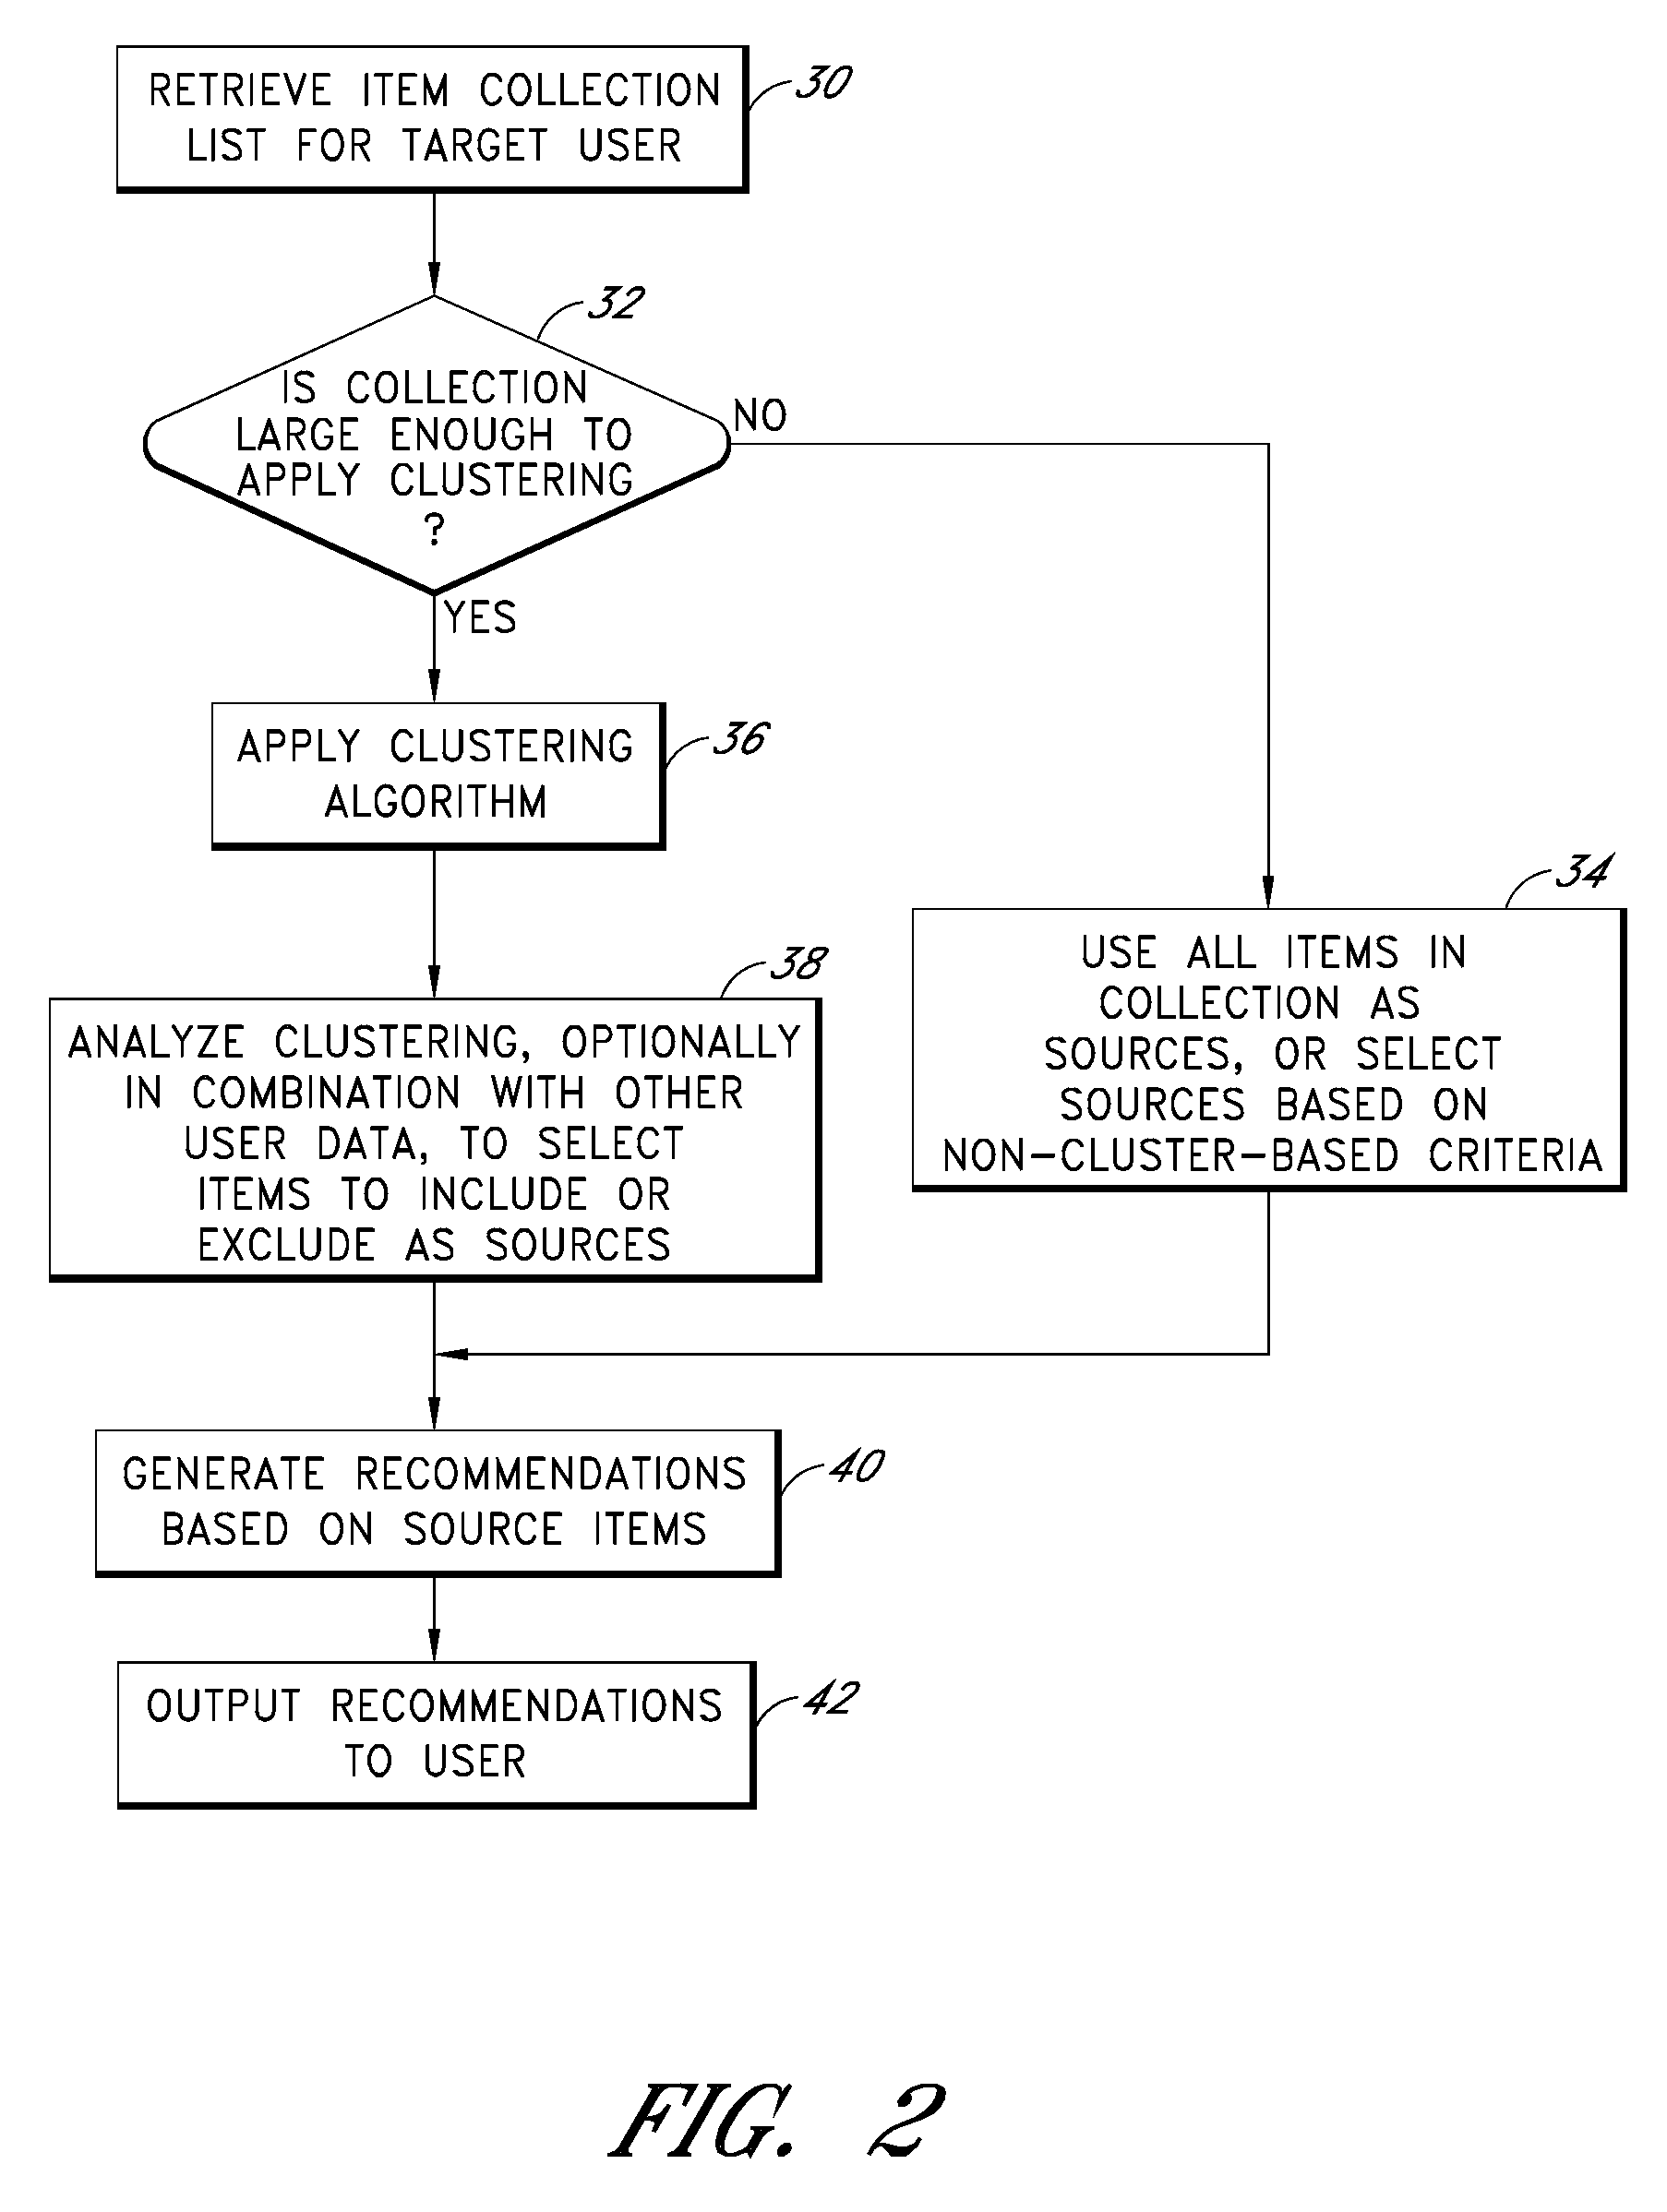 Recommendation system with cluster-based filtering of recommendations